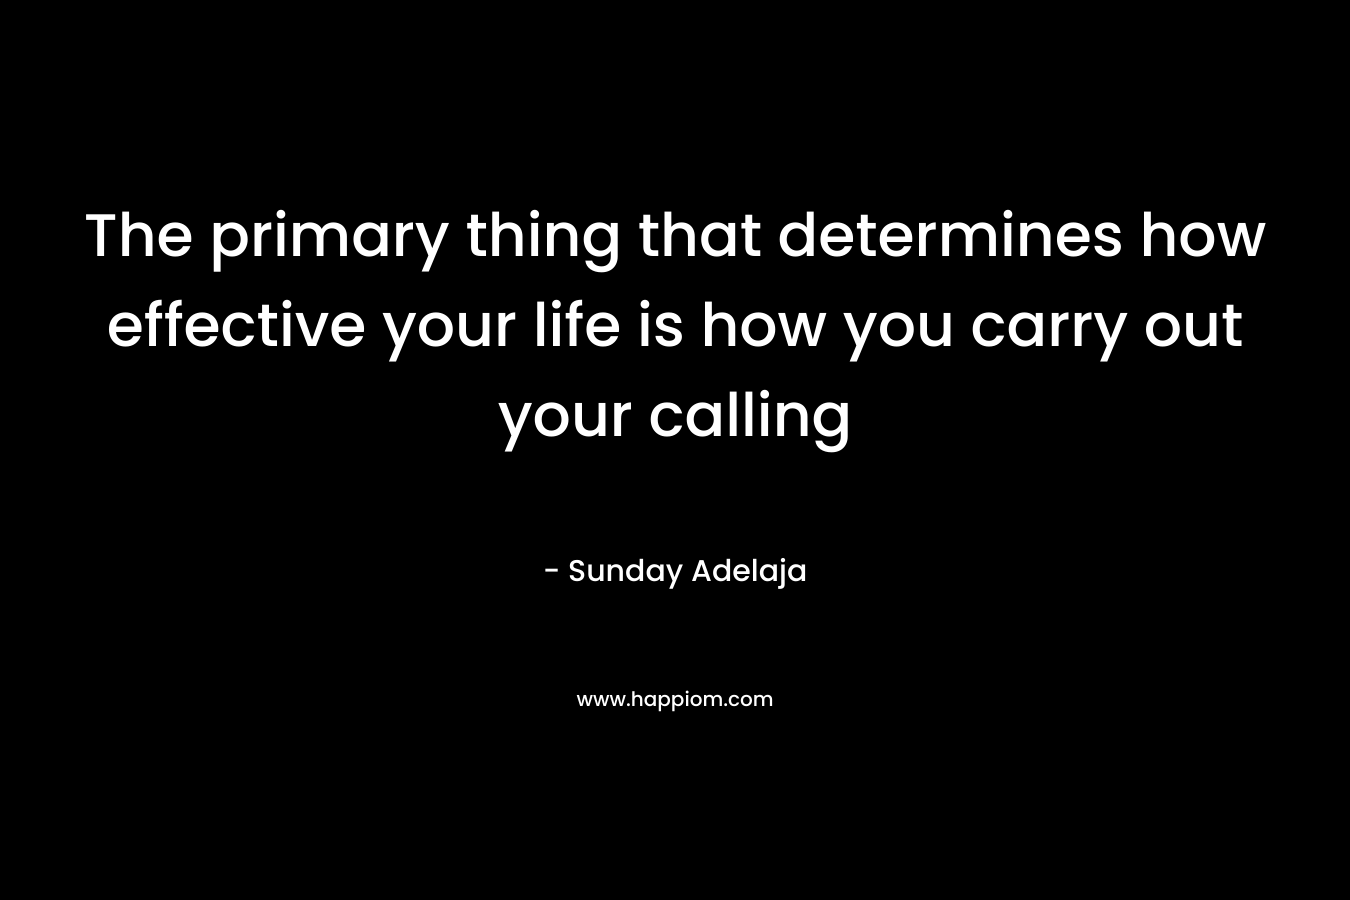 The primary thing that determines how effective your life is how you carry out your calling